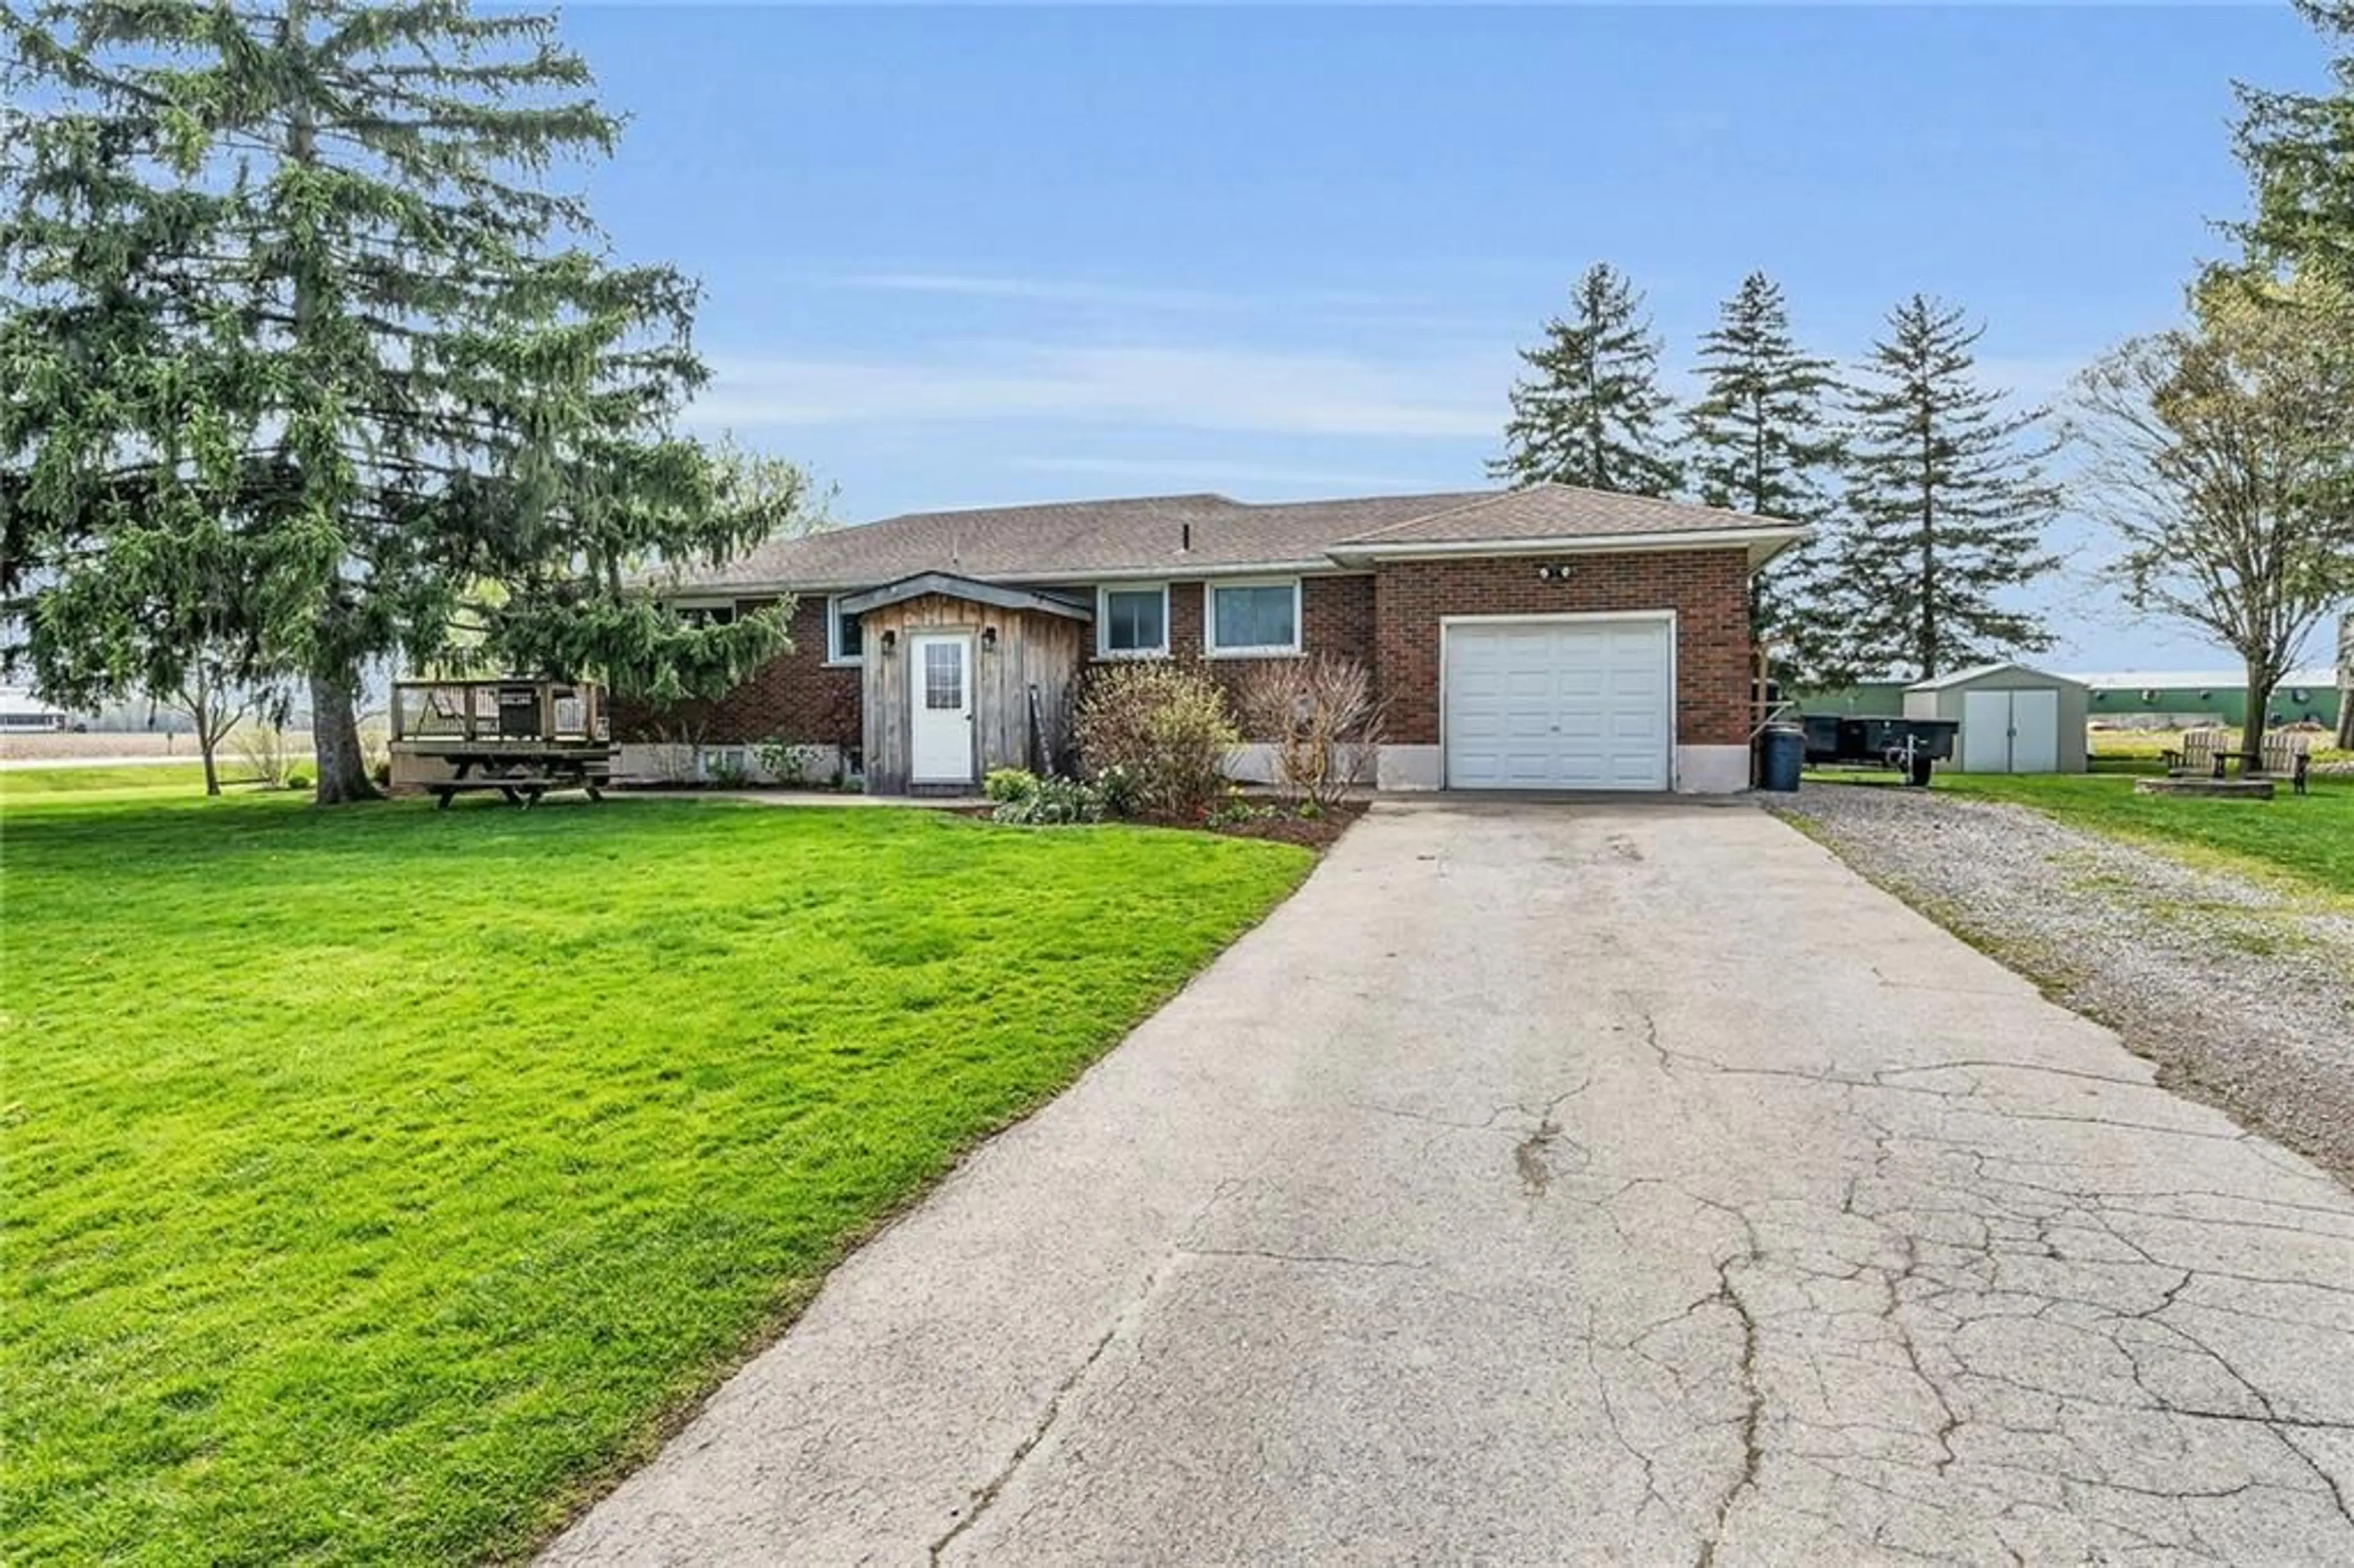 Frontside or backside of a home for 53408 MARR Rd, Wainfleet Ontario L0S 1V0